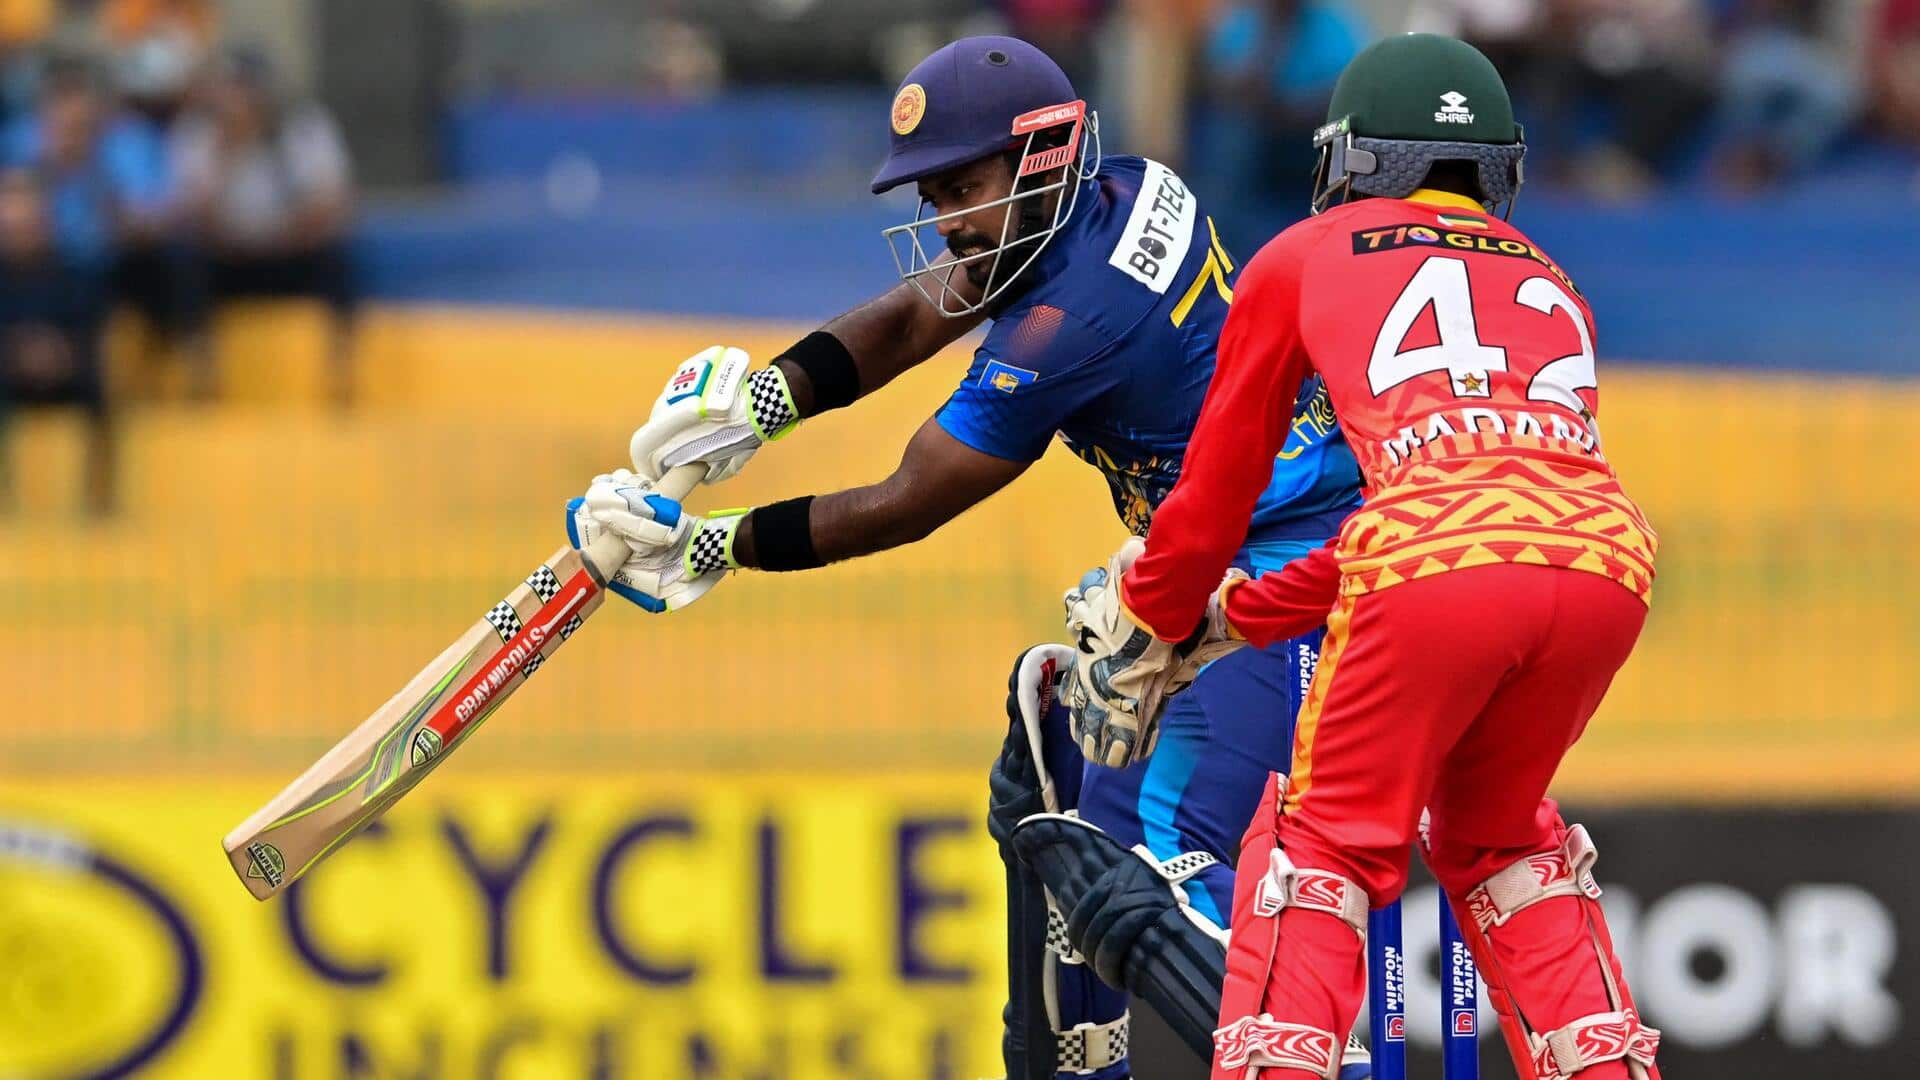 Sri Lanka host Zimbabwe in second ODI: Preview and stats